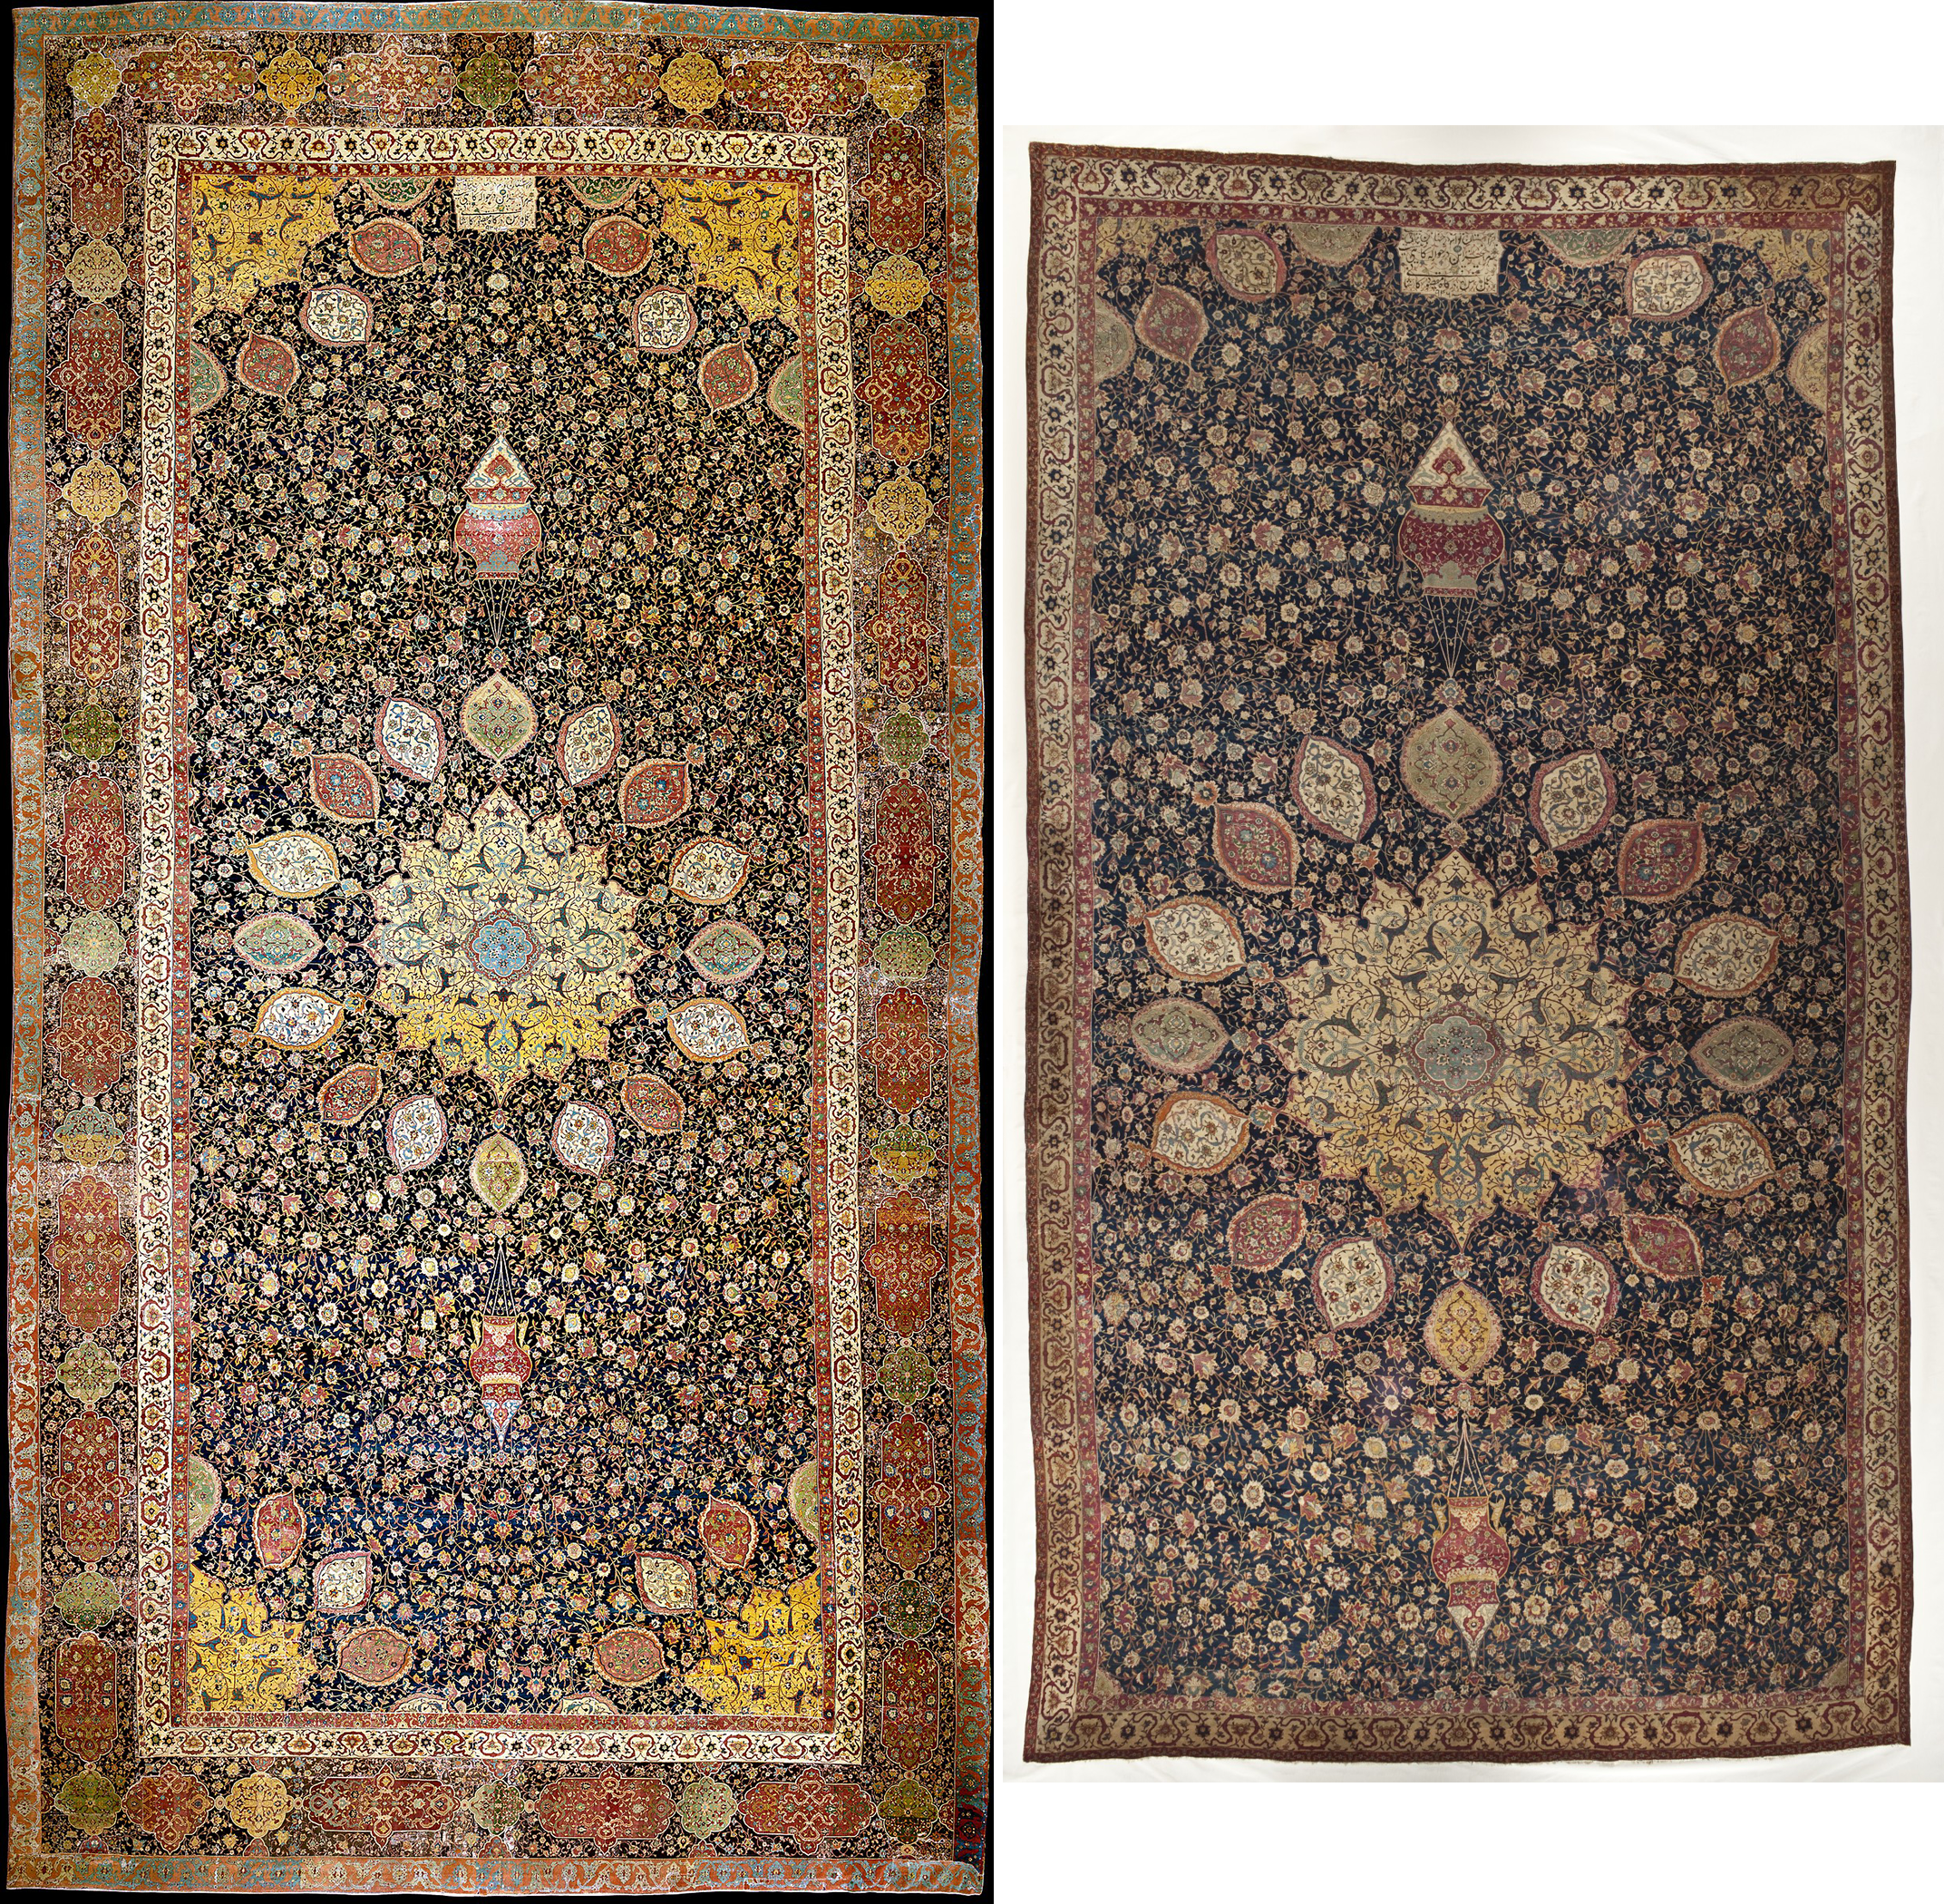 Left: Ardabil Carpet at the Victoria & Albert Museum, London; right: Ardabil Carpet at the Los Angeles County Museum of Art